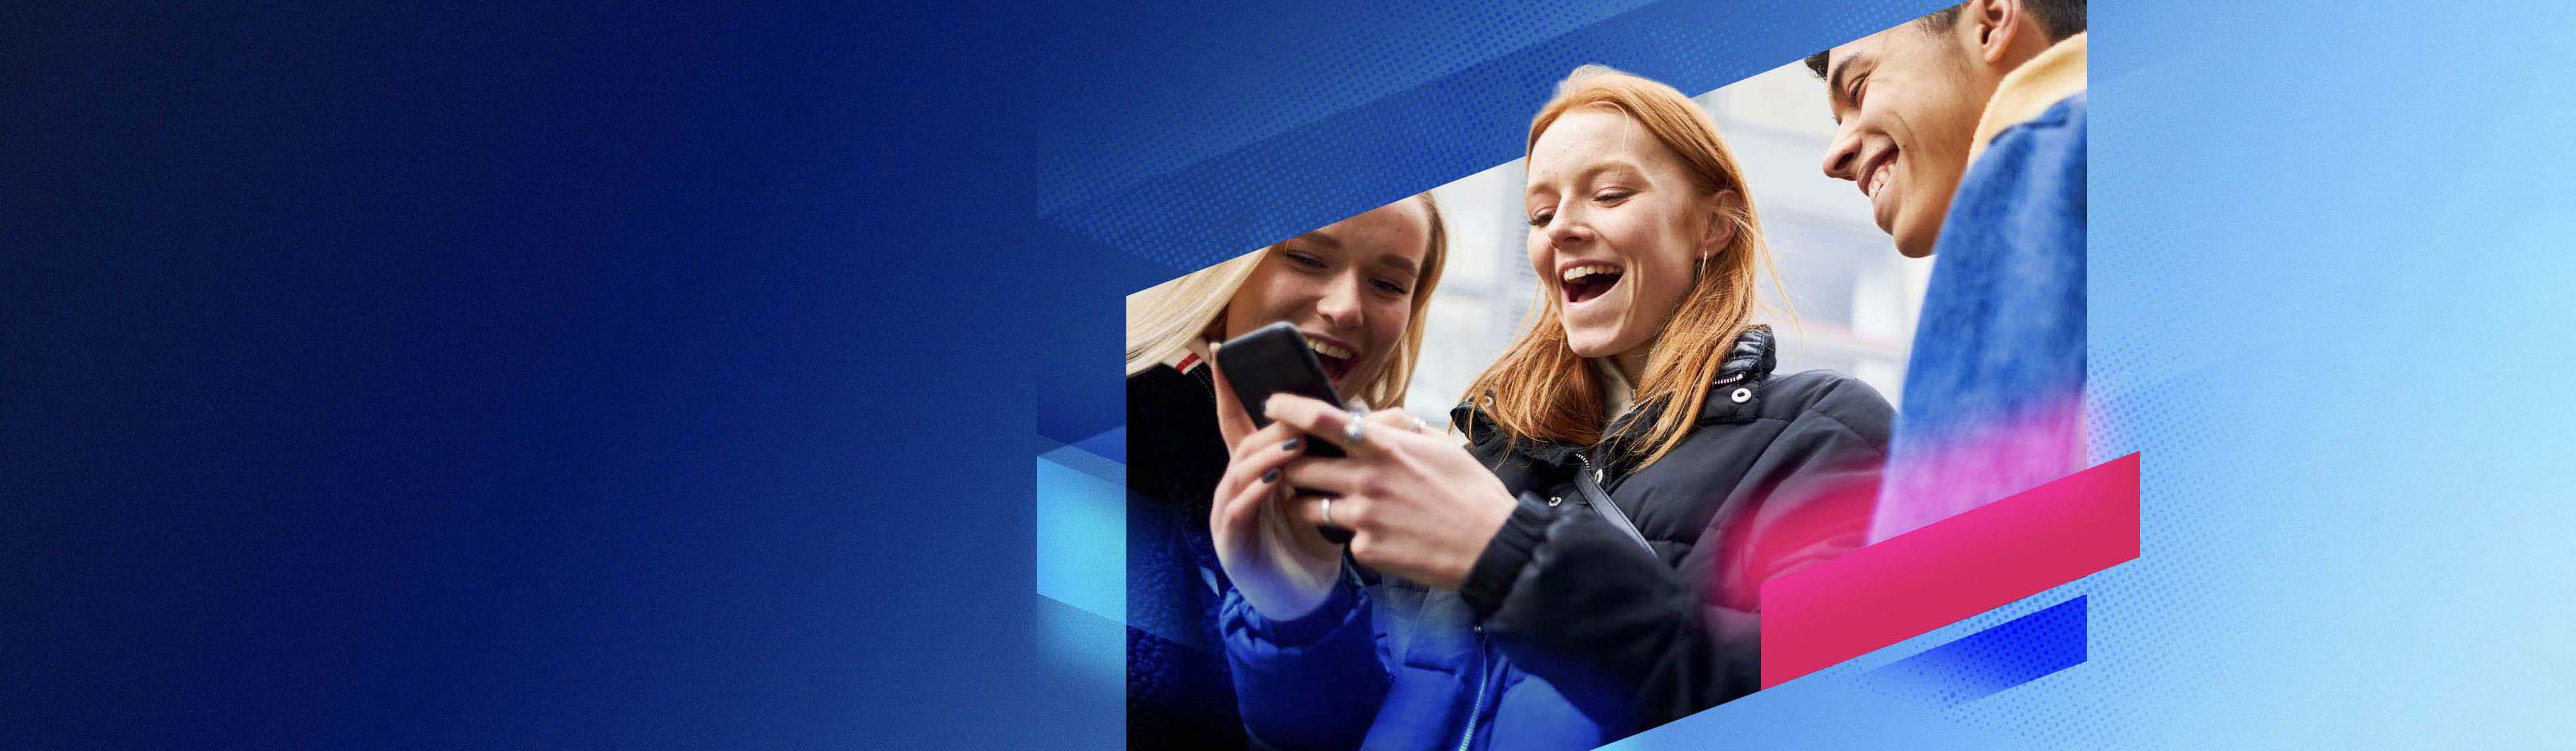 Two young girls smiling looking at a phone